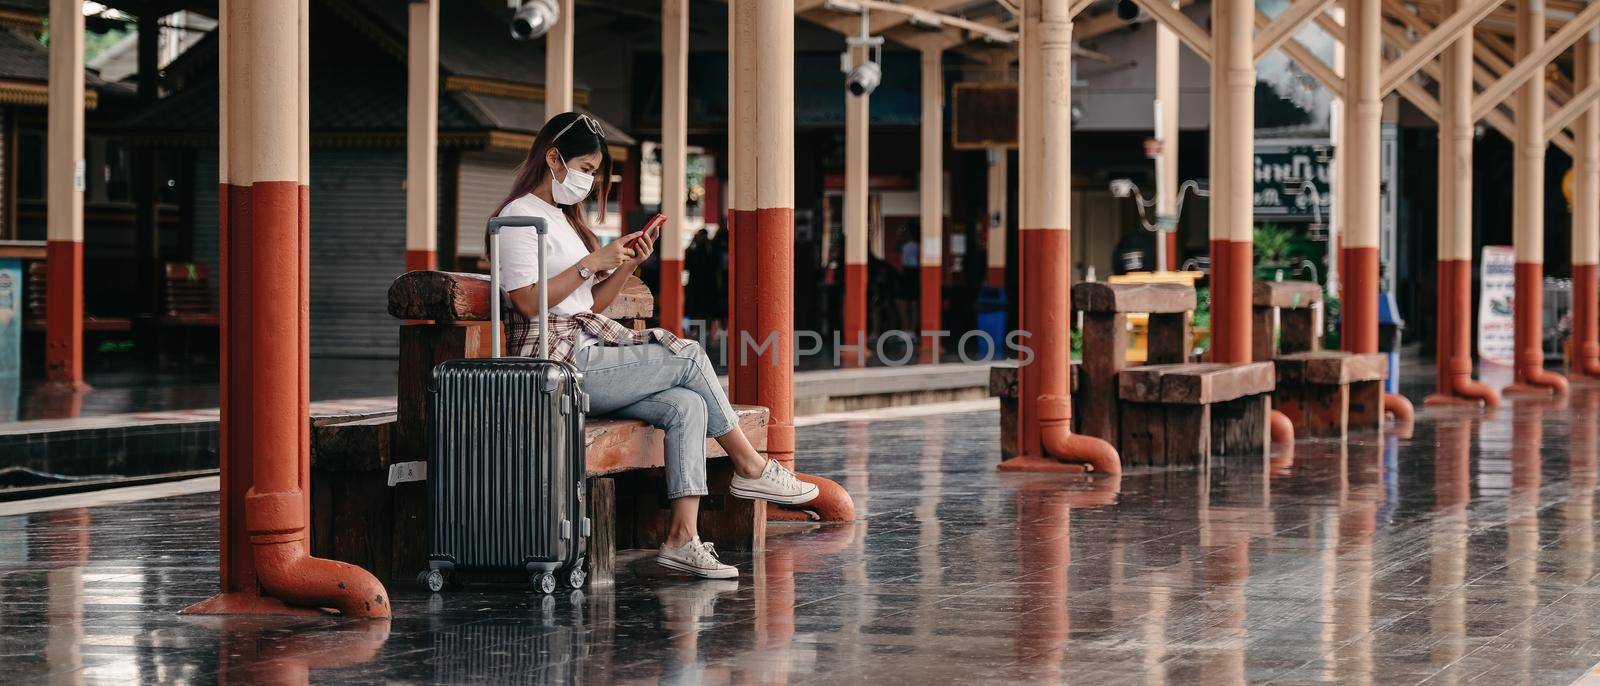 Asian tourist teenage girl at train station using smartphone for online map, social media check-in, or buy ticket booking. Modern travel app technology, lone traveler. by nateemee